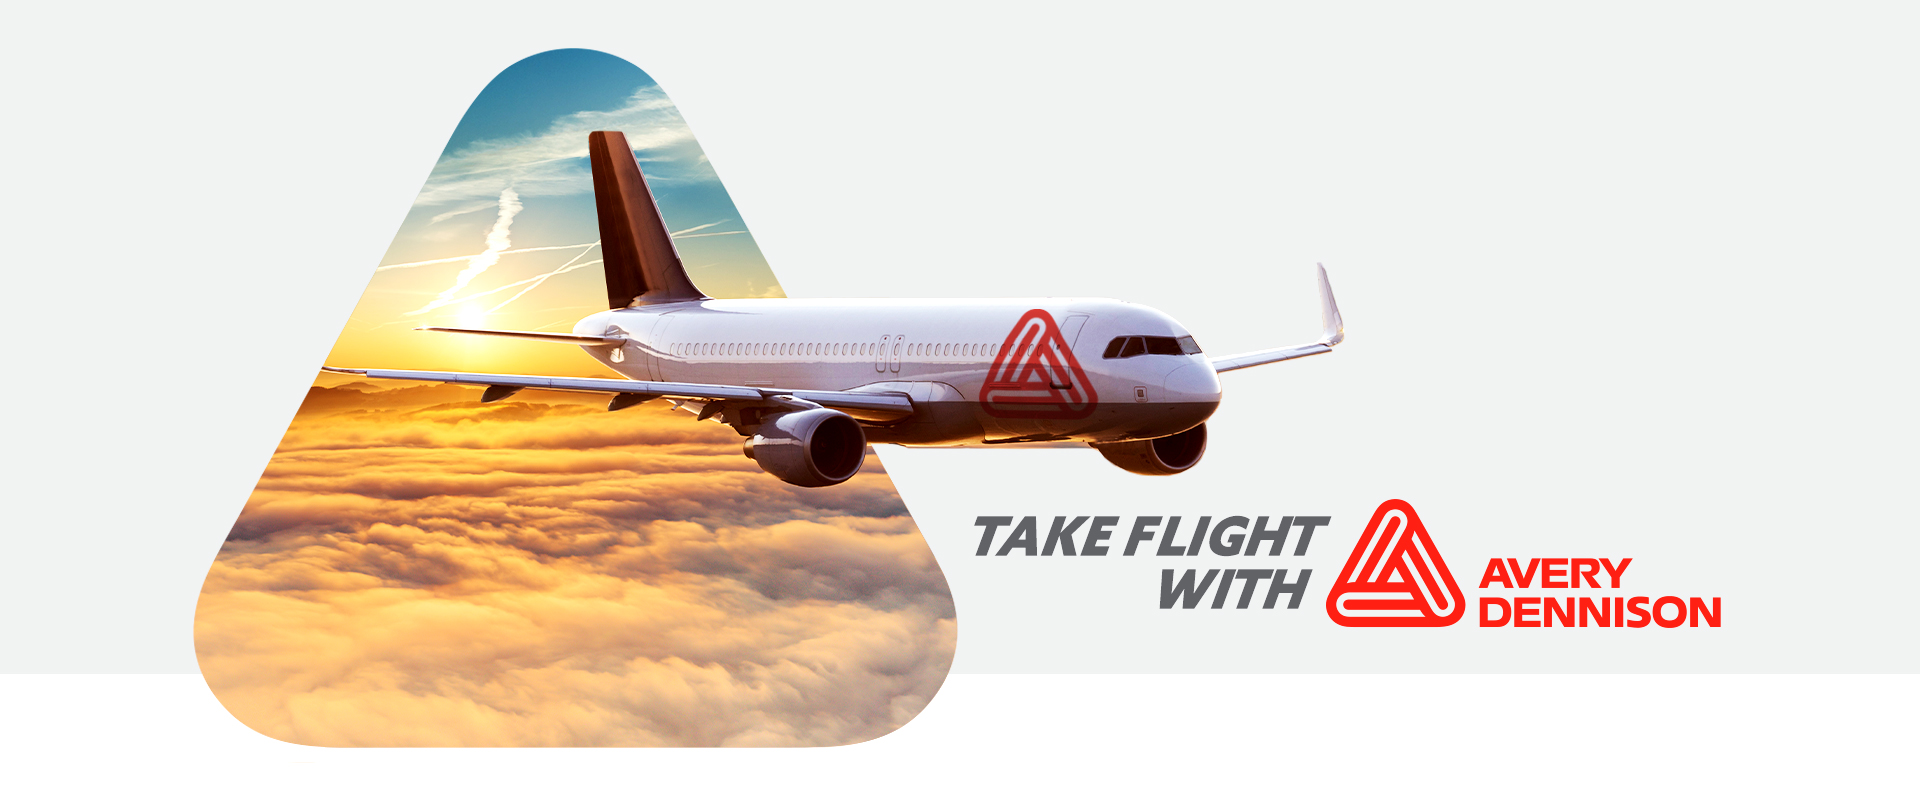 Take Flight with Avery Dennison